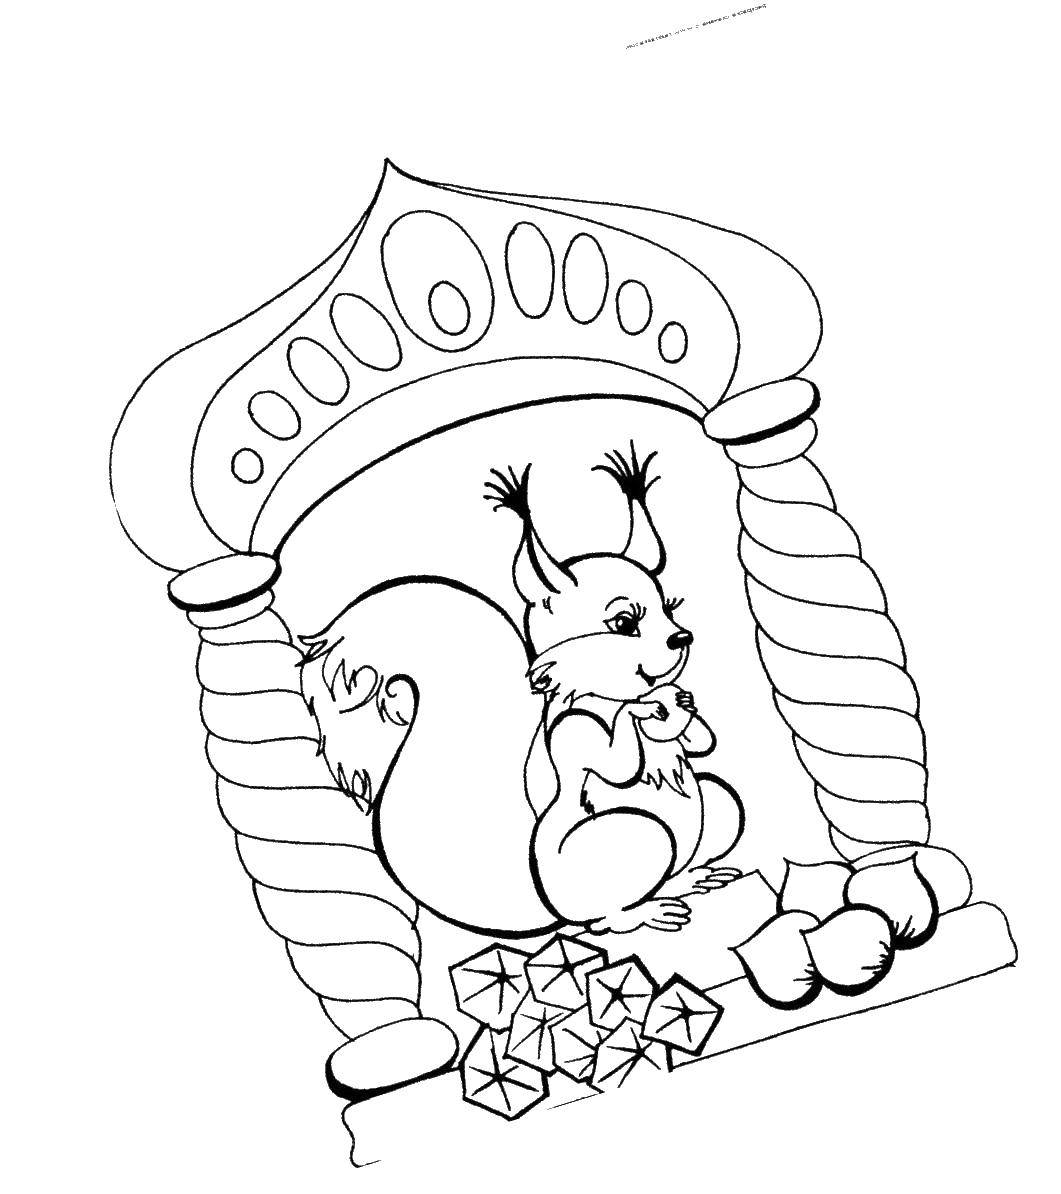 Coloring Squirrel gnaws nuts. Category Fairy tales. Tags:  protein, nuts.